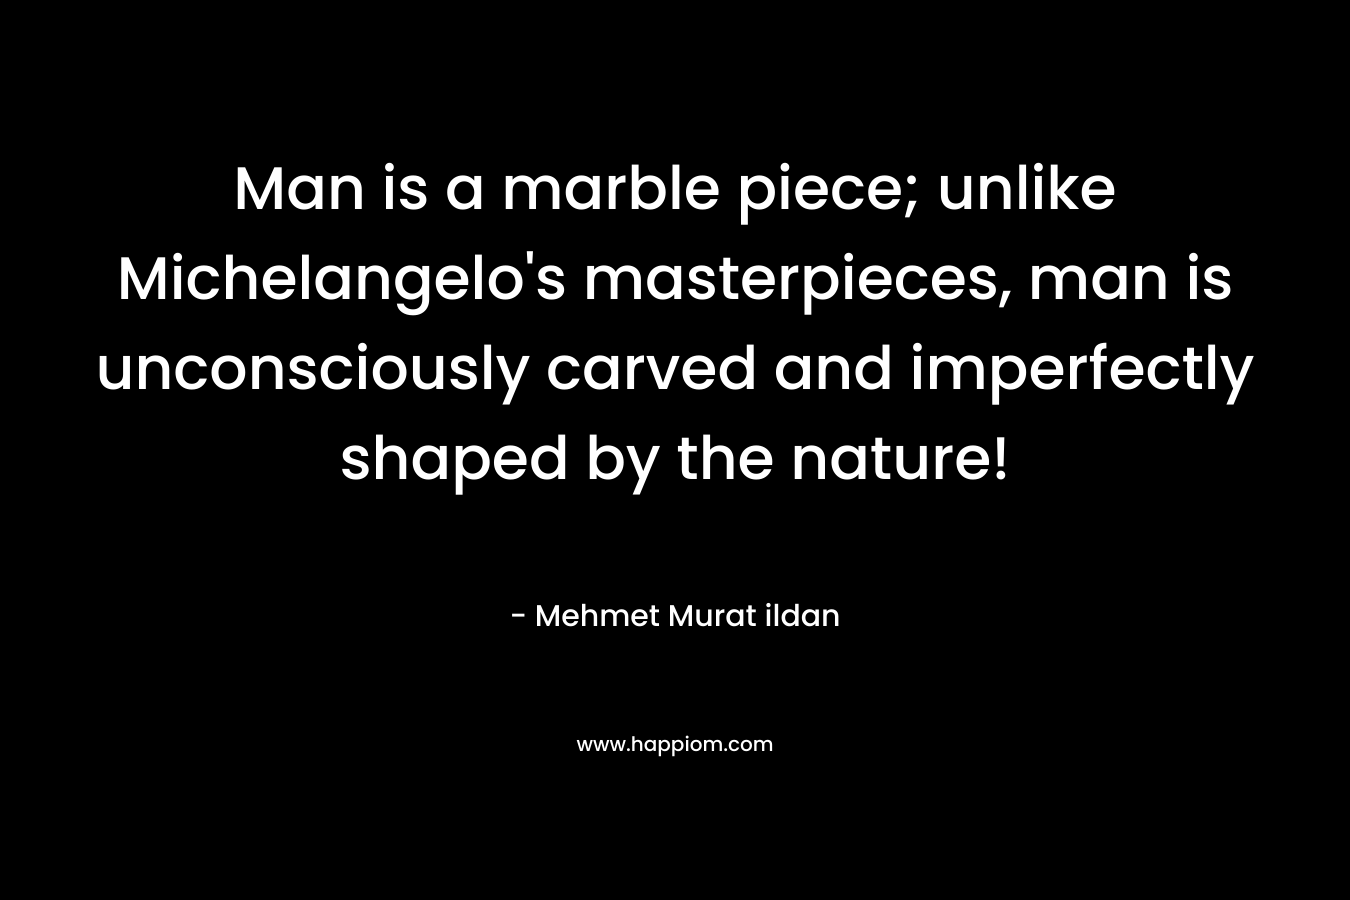 Man is a marble piece; unlike Michelangelo’s masterpieces, man is unconsciously carved and imperfectly shaped by the nature! – Mehmet Murat ildan